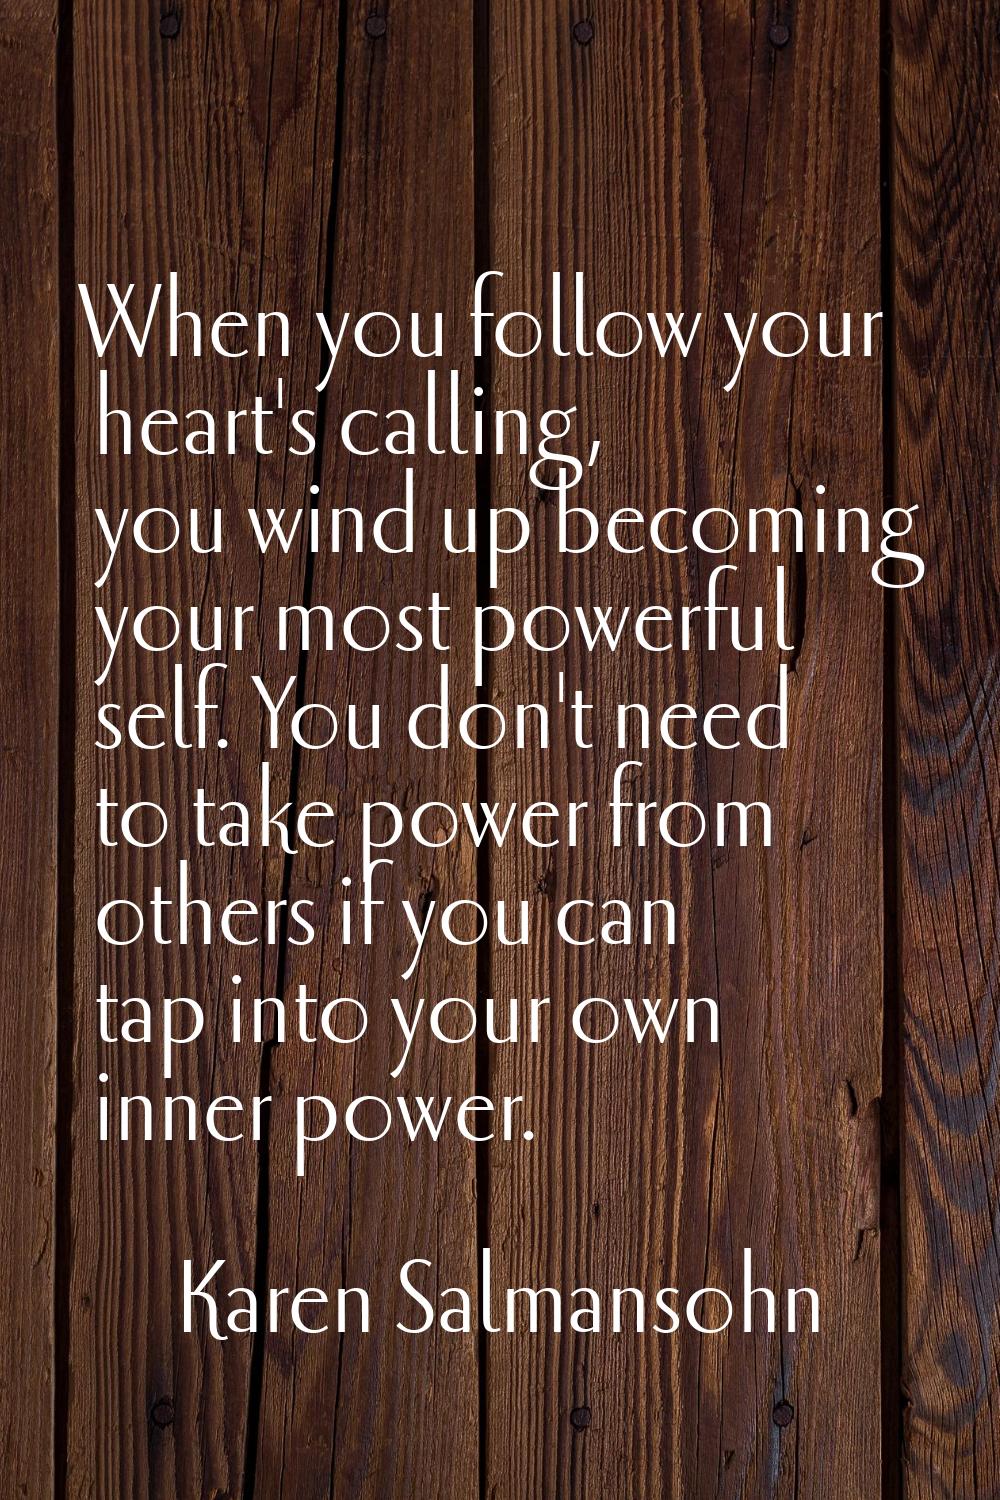 When you follow your heart's calling, you wind up becoming your most powerful self. You don't need 